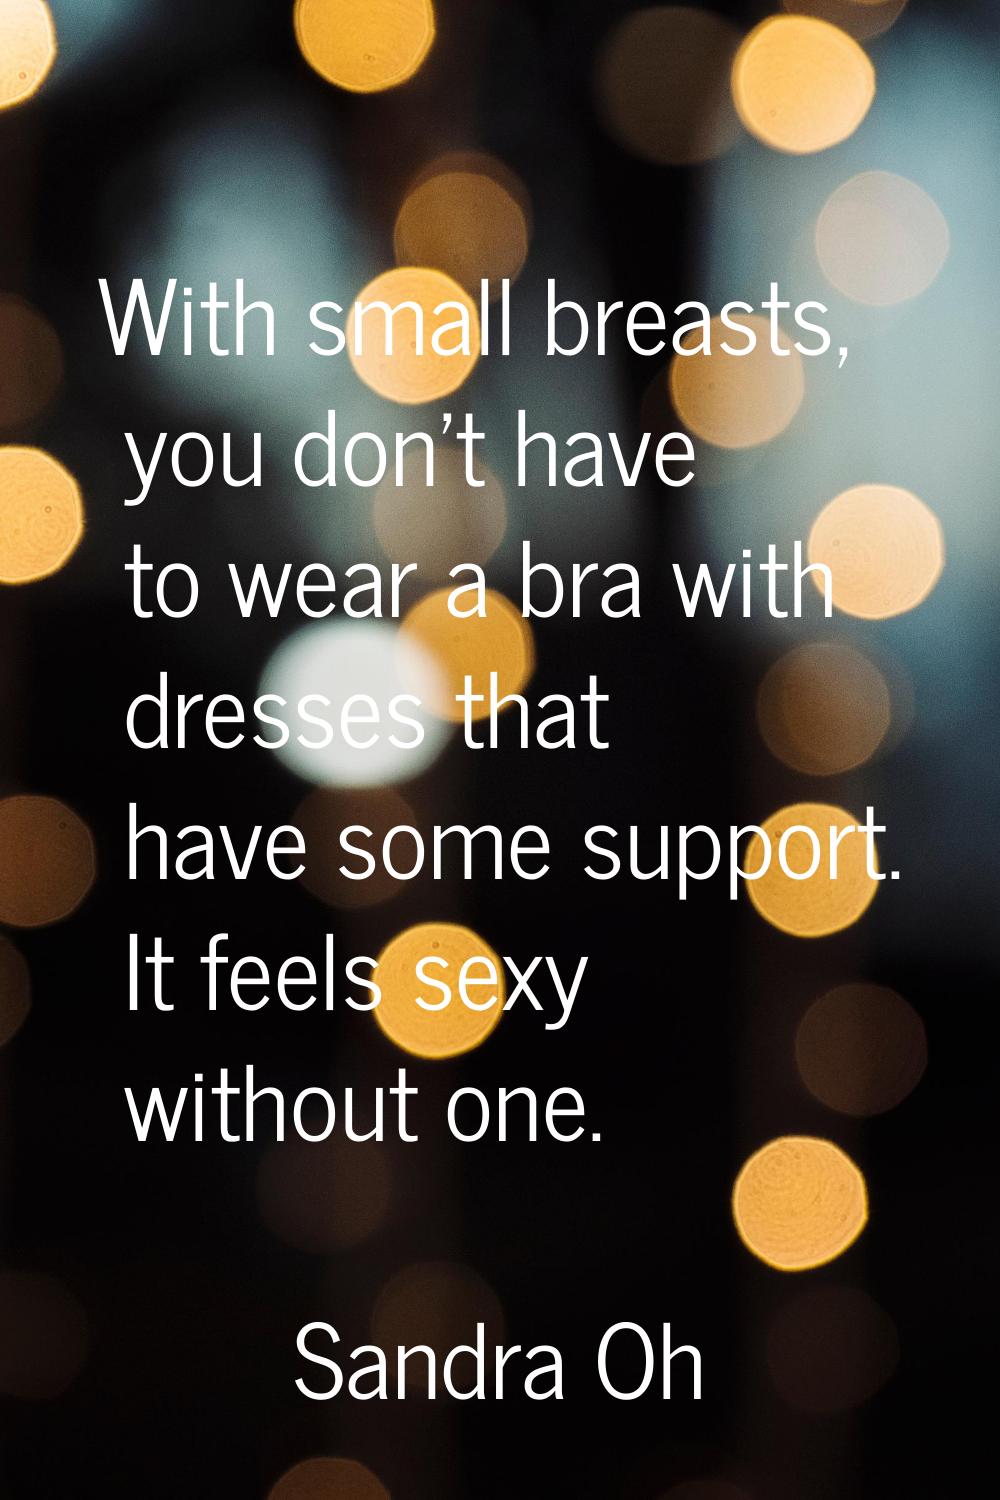 With small breasts, you don't have to wear a bra with dresses that have some support. It feels sexy